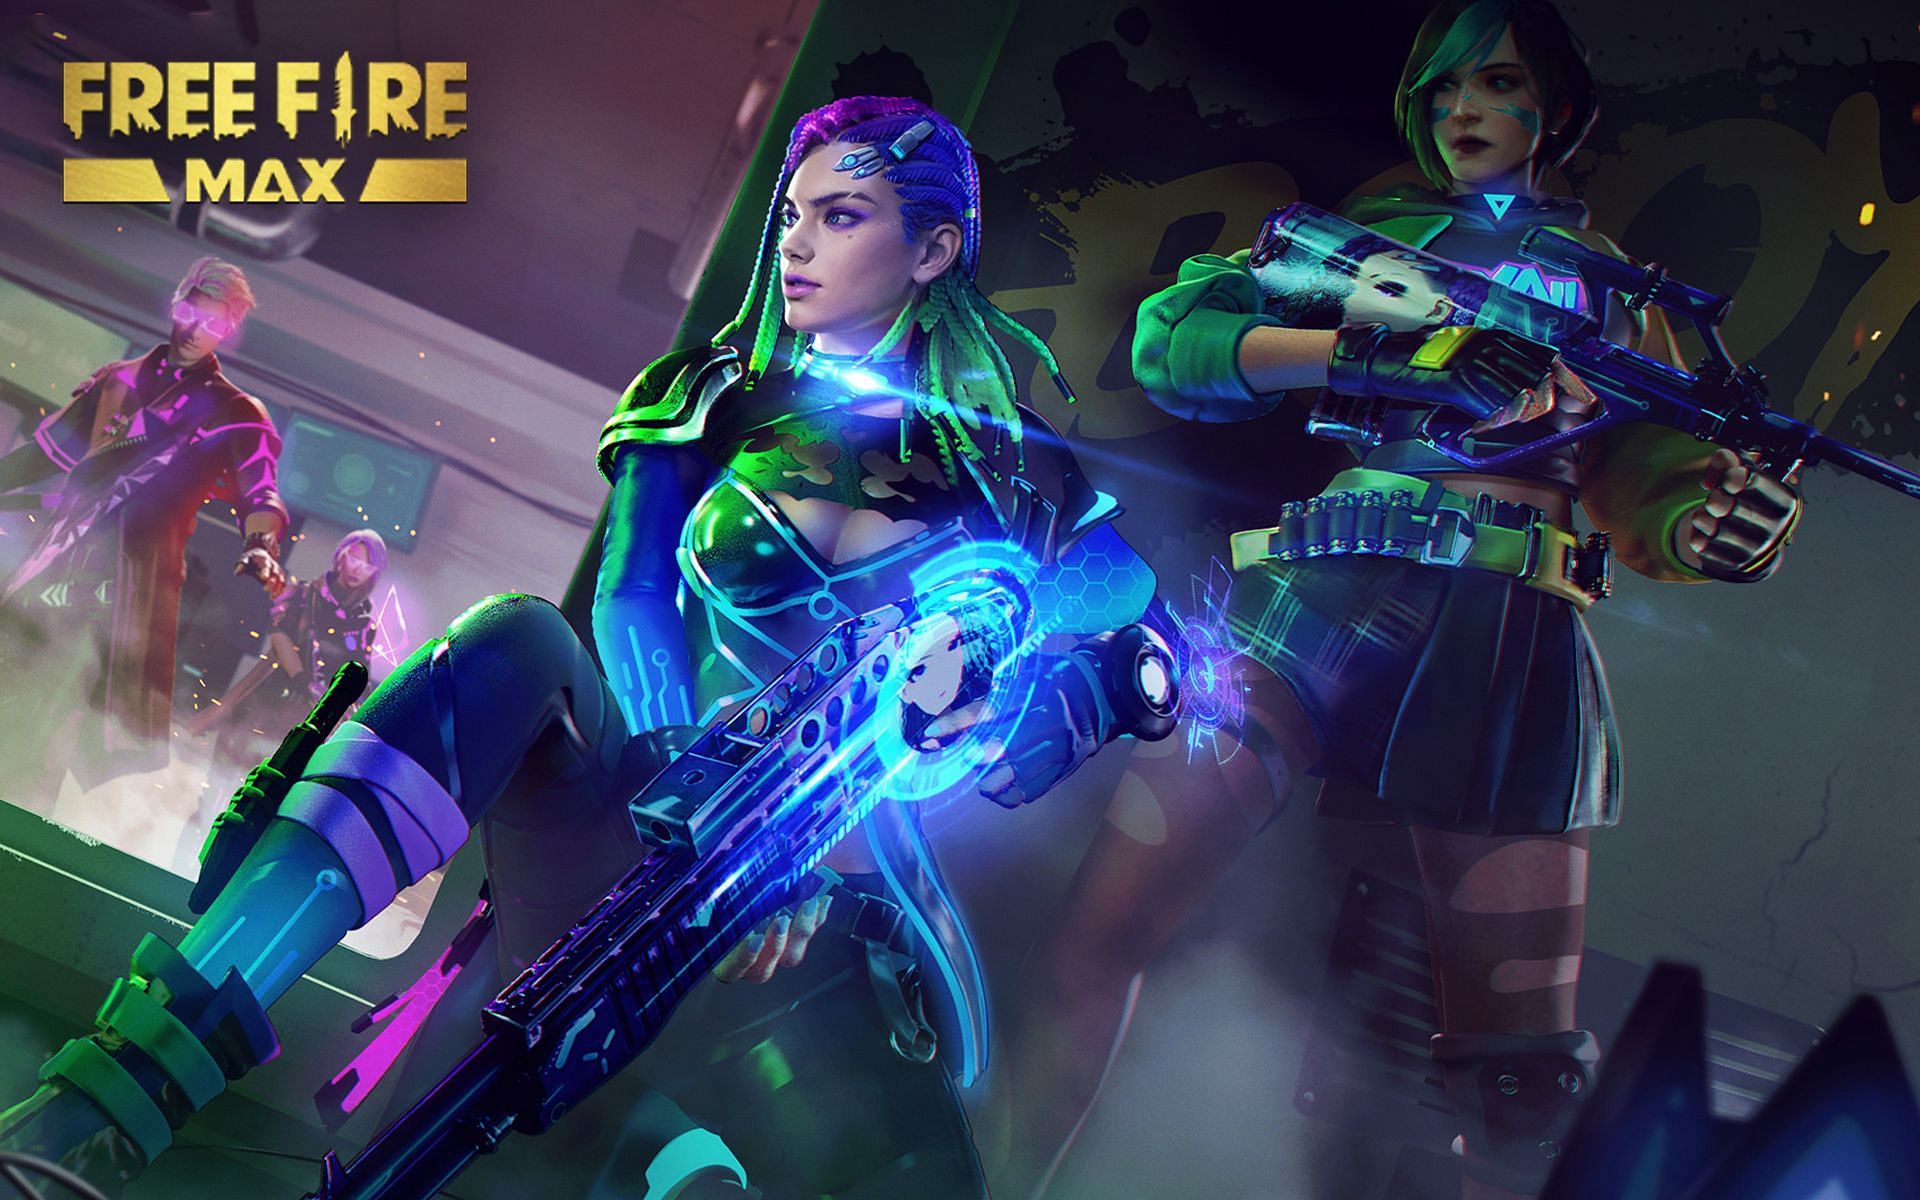 Female characters player to get in Free Fire MAX Indian server (Image via Sportskeeda)